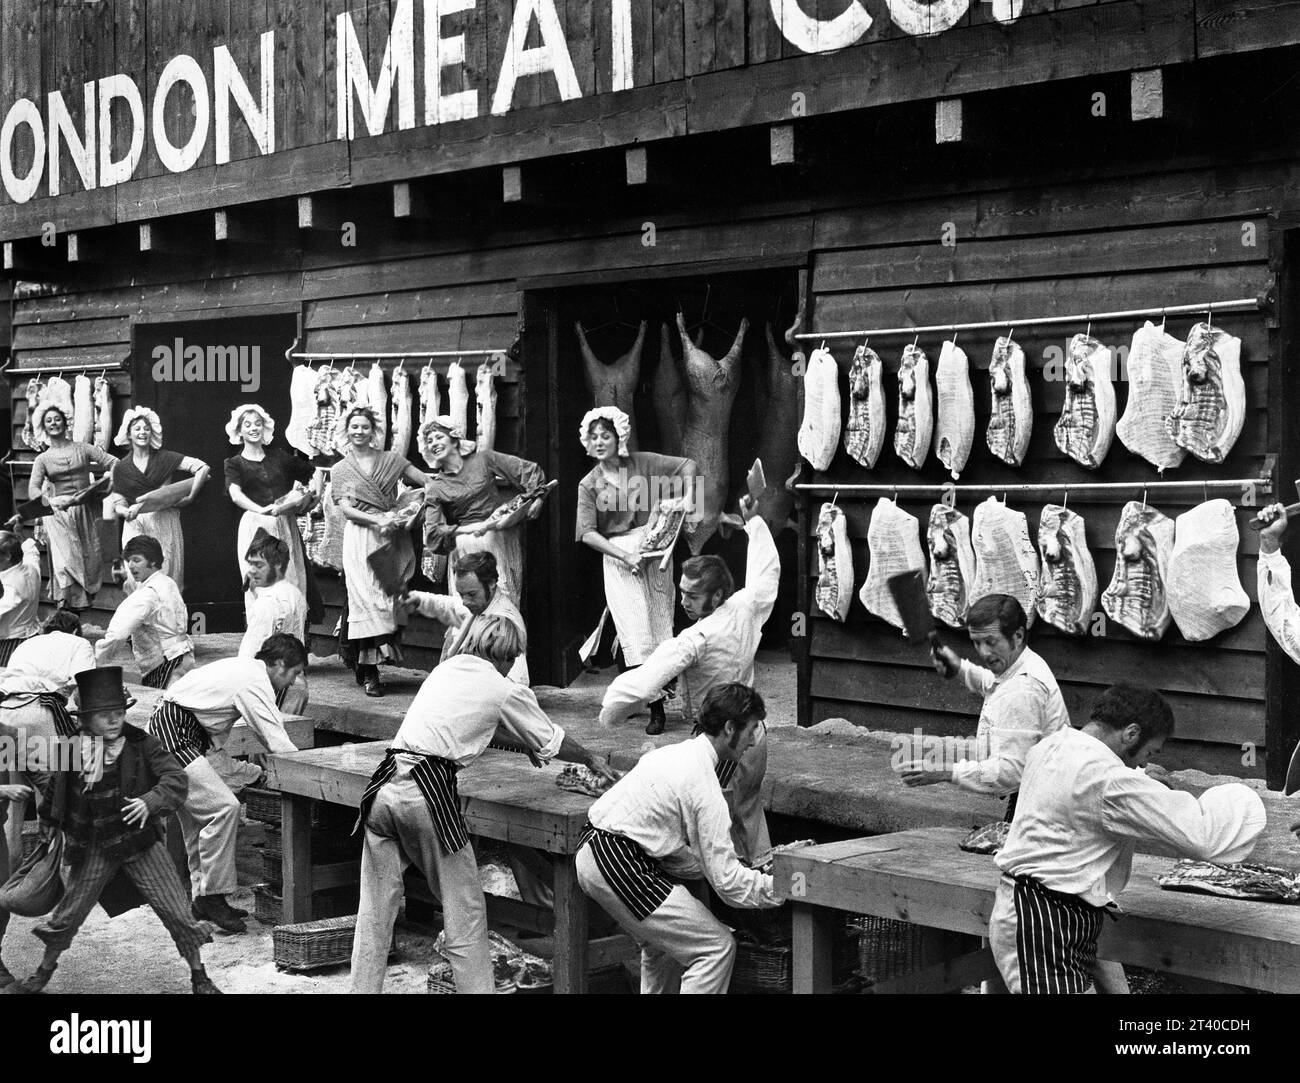 London meat market scene, on-set of the British musical film, 'Oliver!', Columbia Pictures, 1968 Stock Photo